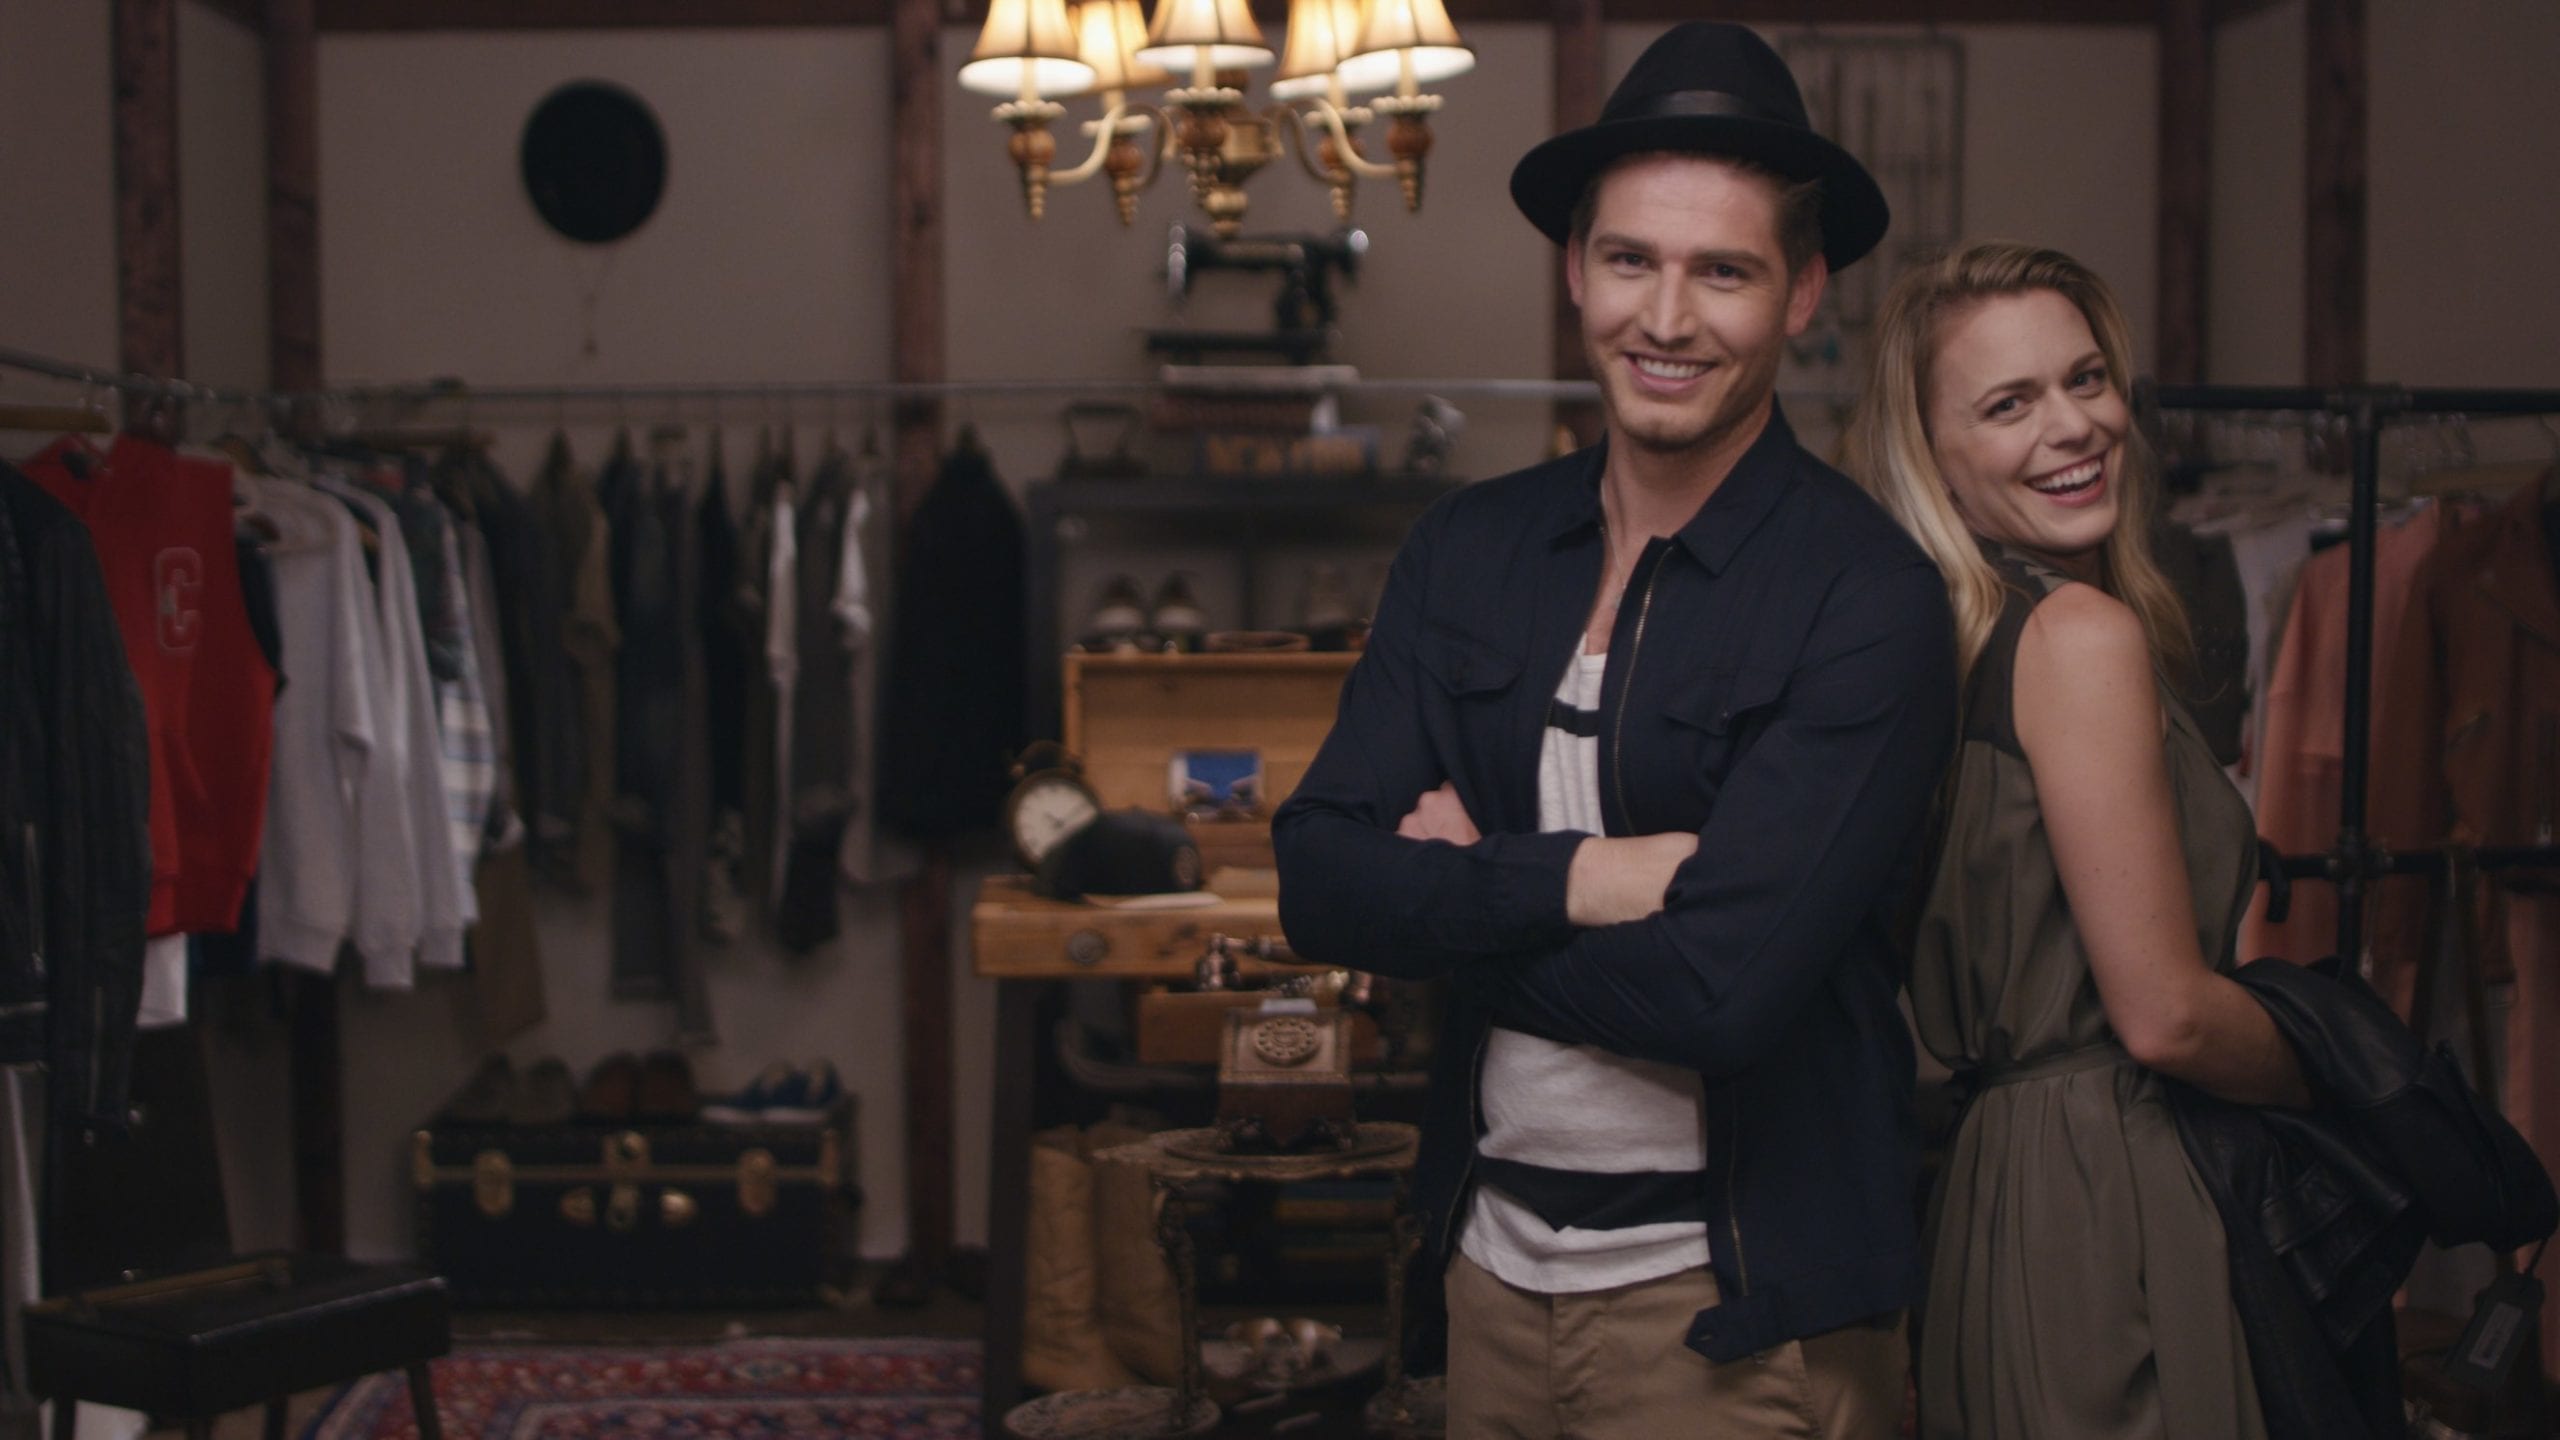 AllSaints Clothing Brand Man wearing a black hat and dark blue shirt standing with his back against a woman wearing a dress and long blond hair in a wardrobe room smiling and posing for the camera